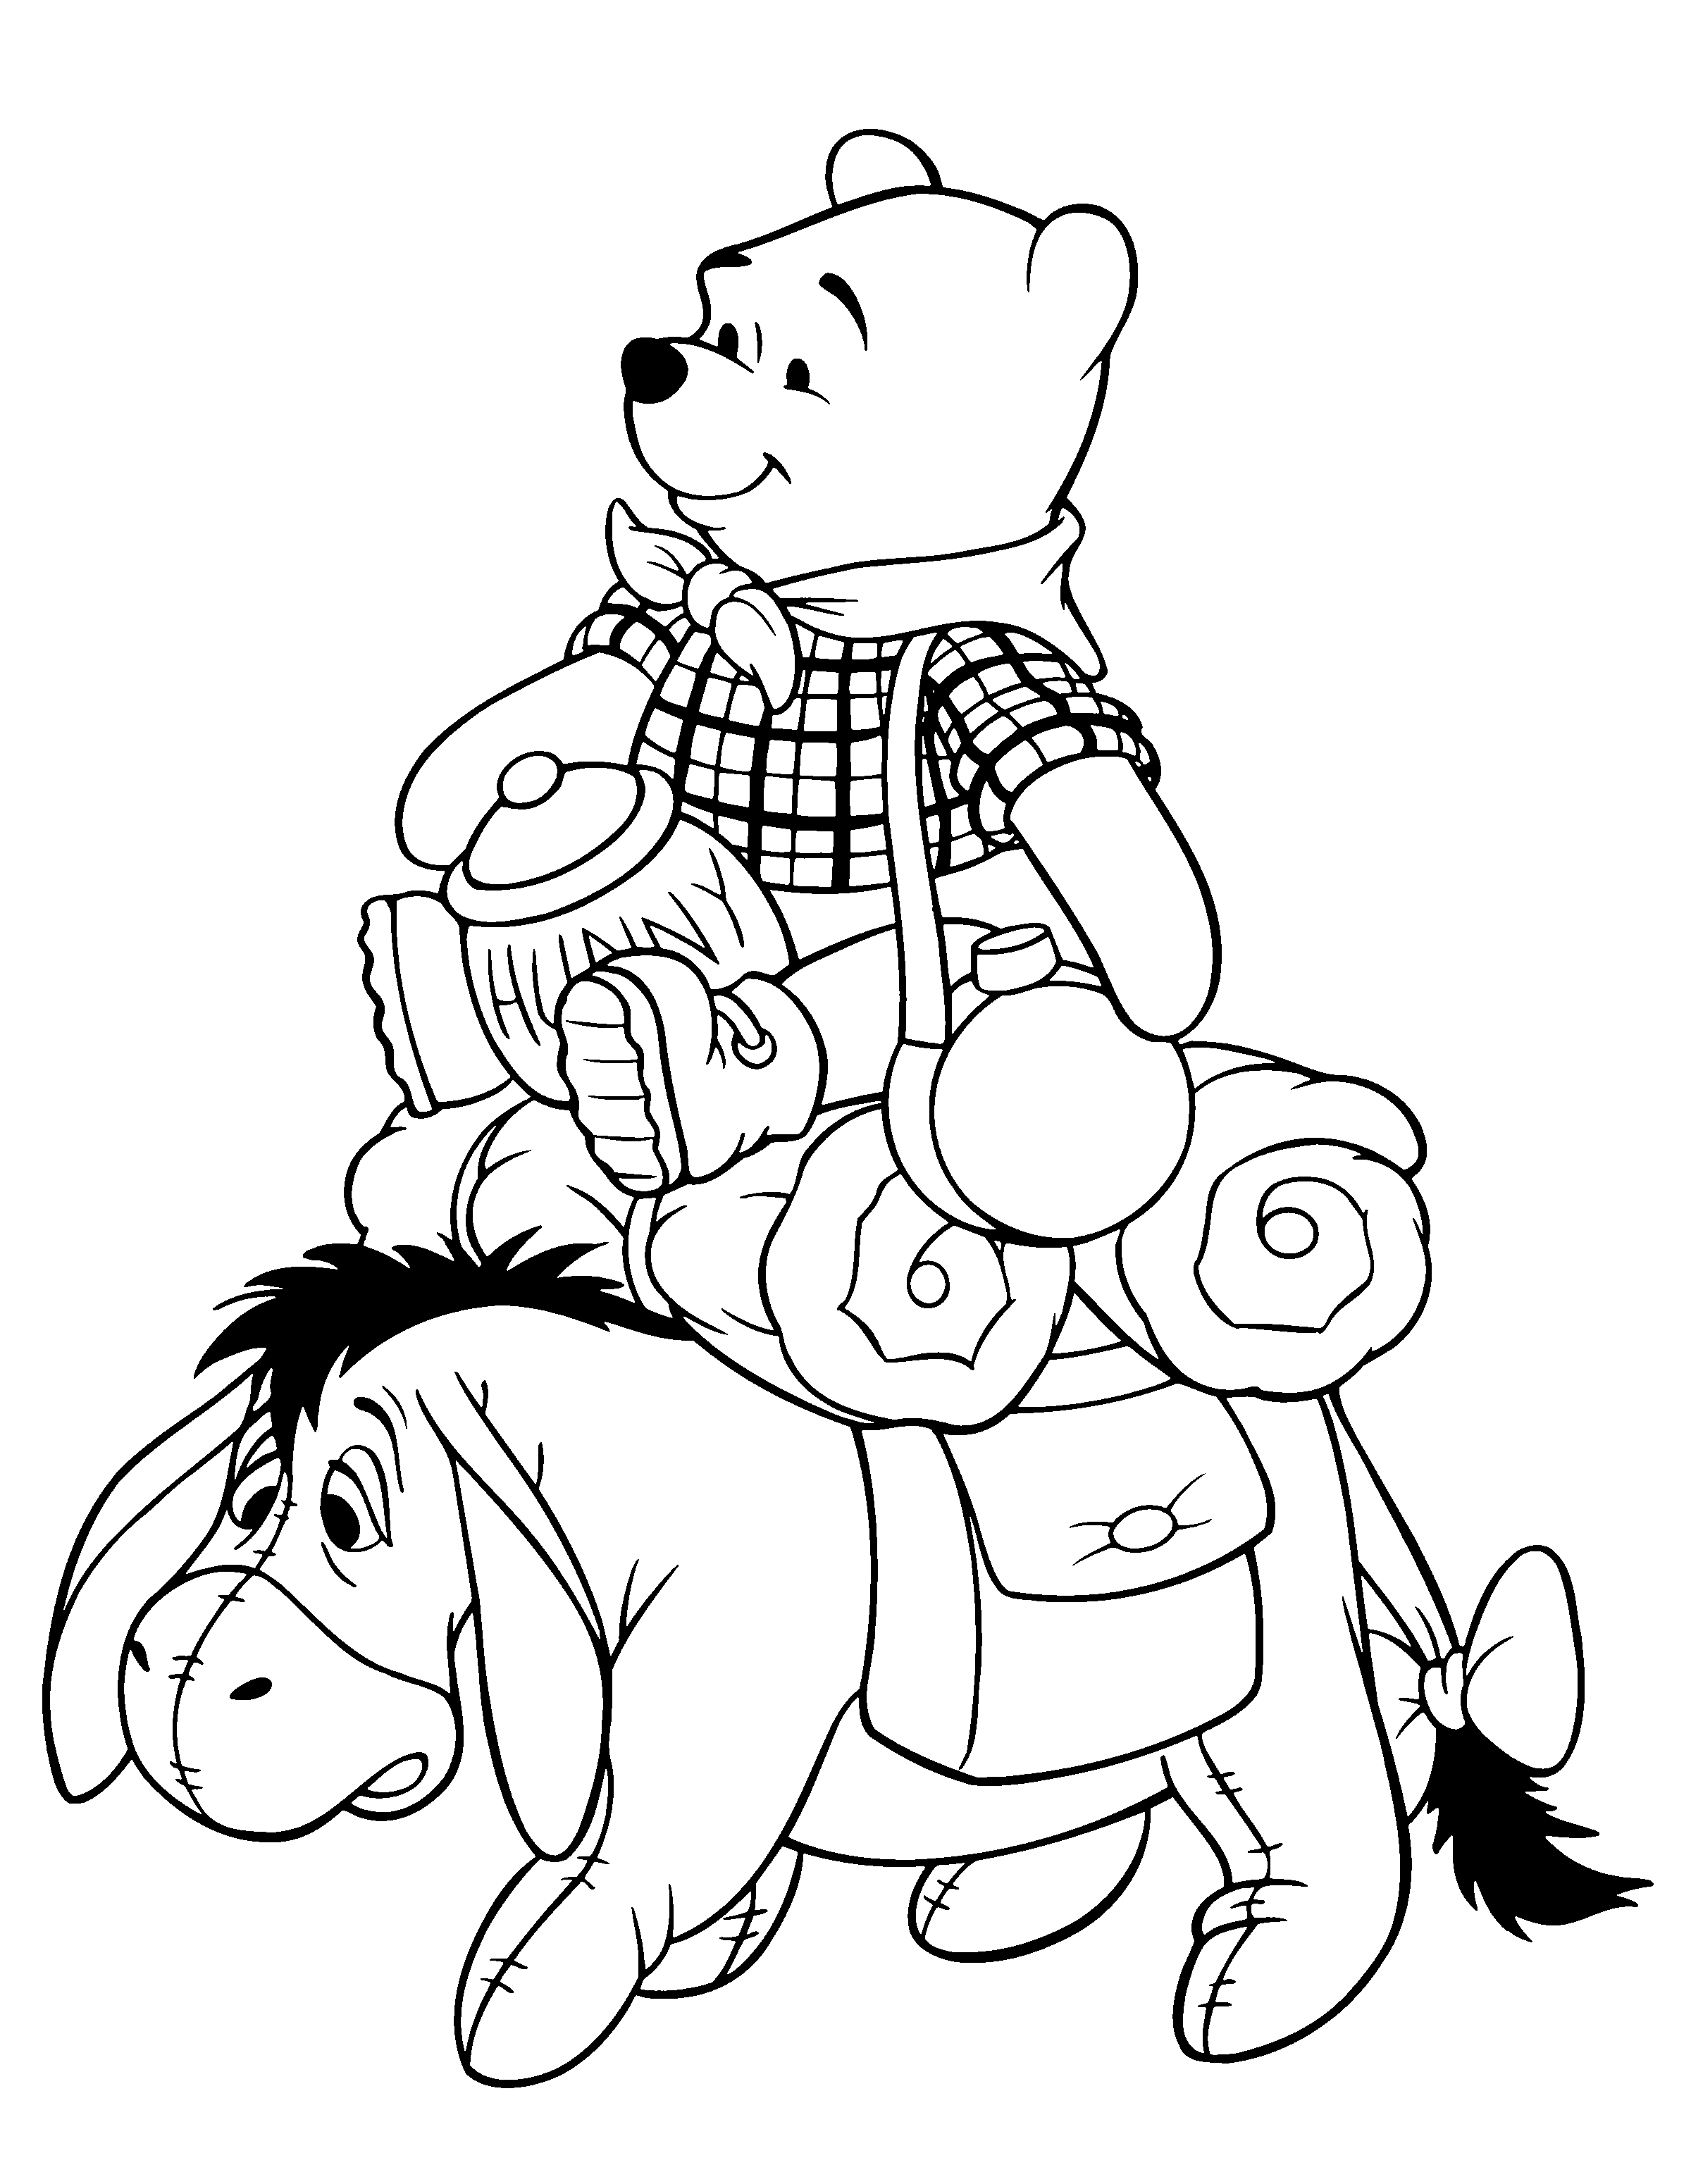 Winnie The Pooh Coloring Pages Games - Winnie the pooh to color for